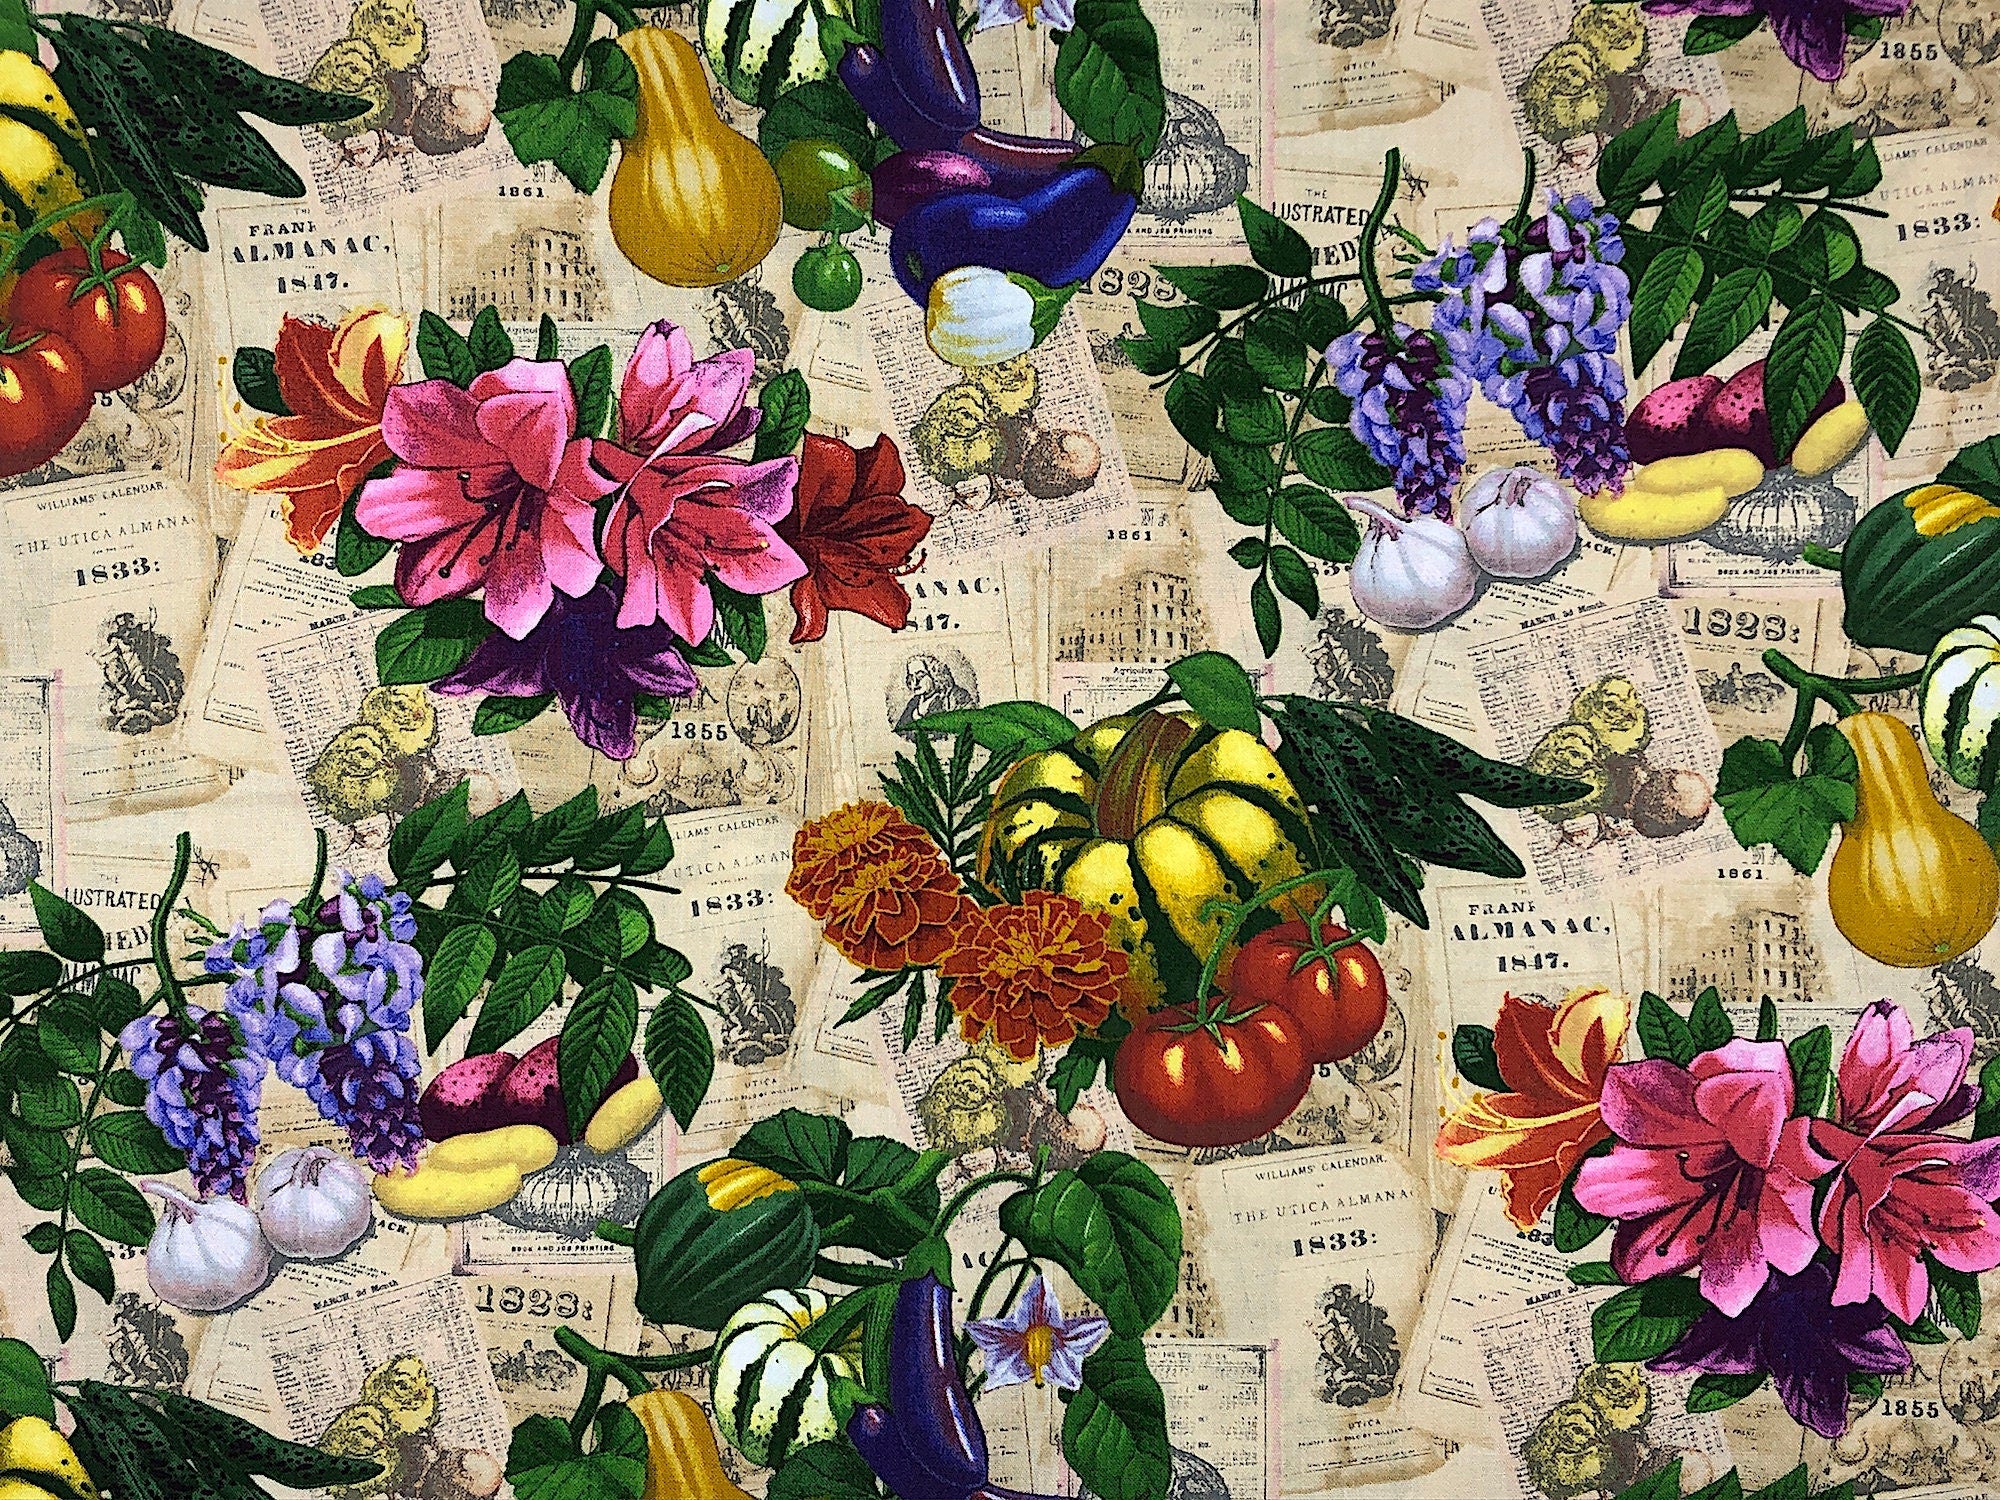 This fabric is covered with vegetables and flowers. In the background you will find the old farmers almanac. Some of the vegetables are tomatoes, squash and garlic. The flowers are lilies, marigolds and more.